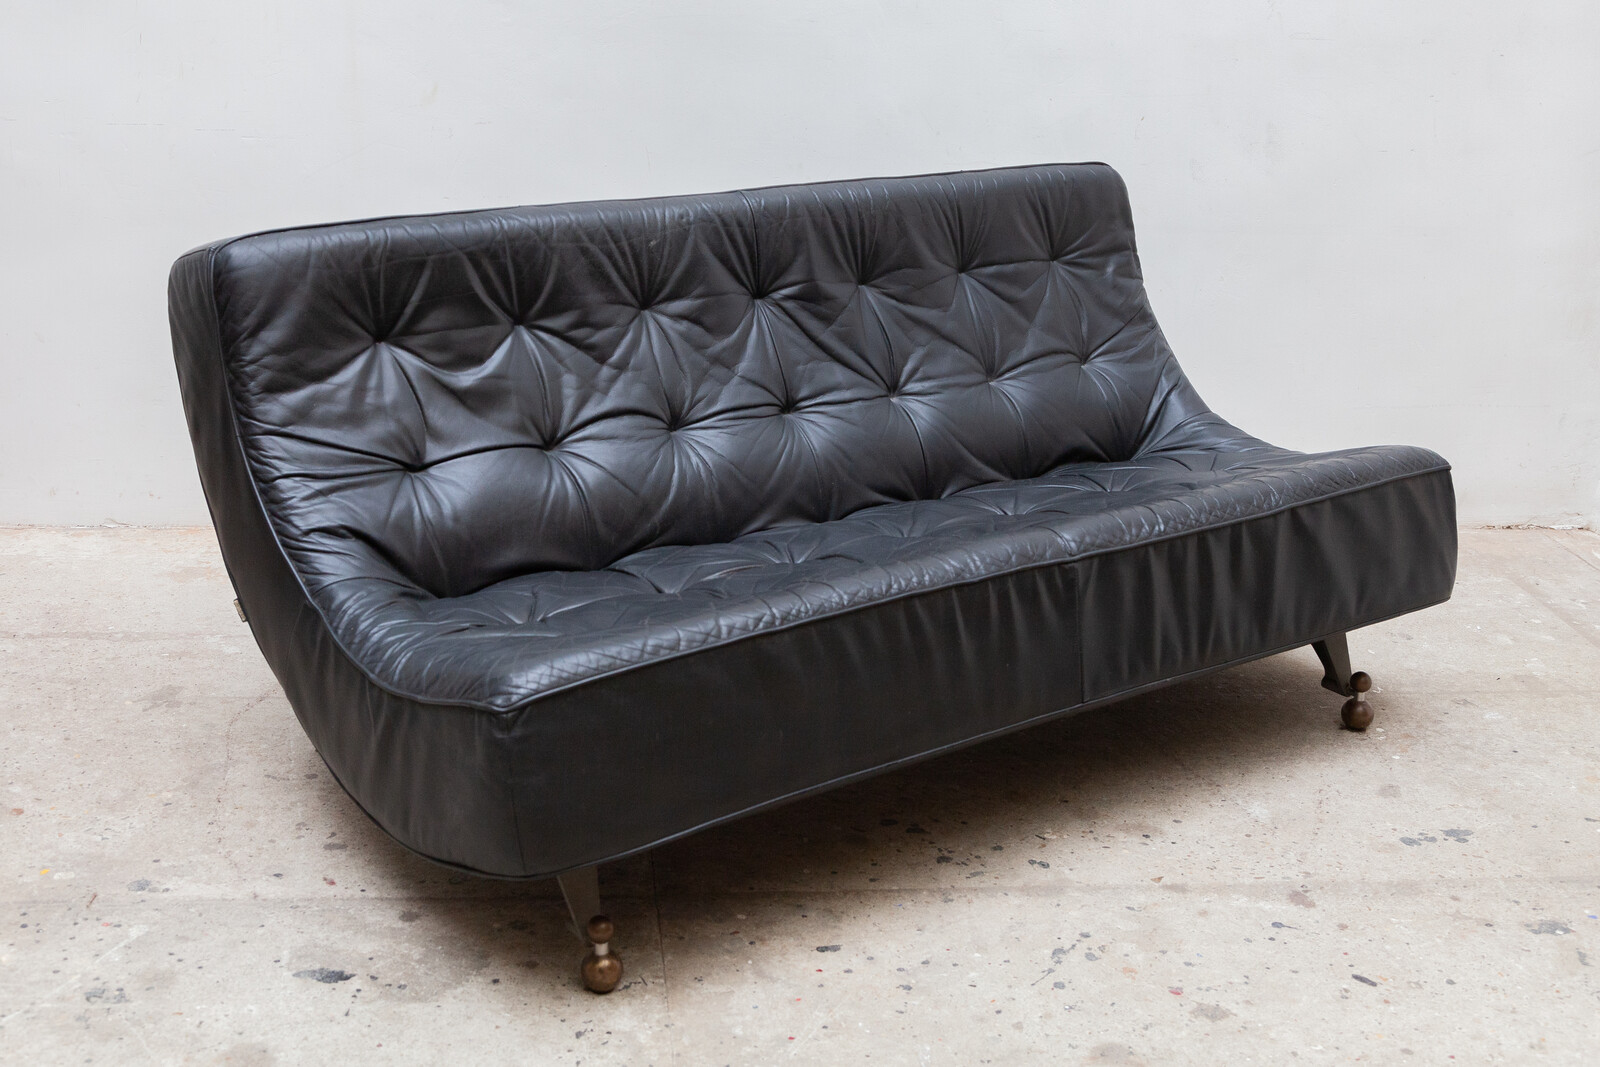 Eclectic Recent - Gerard Items Interiors 1980s, DECORATIVE Leather den by Berg van Tufted Sofa - Akanthos European Black ANTIQUES - Added Netherlands & Montis